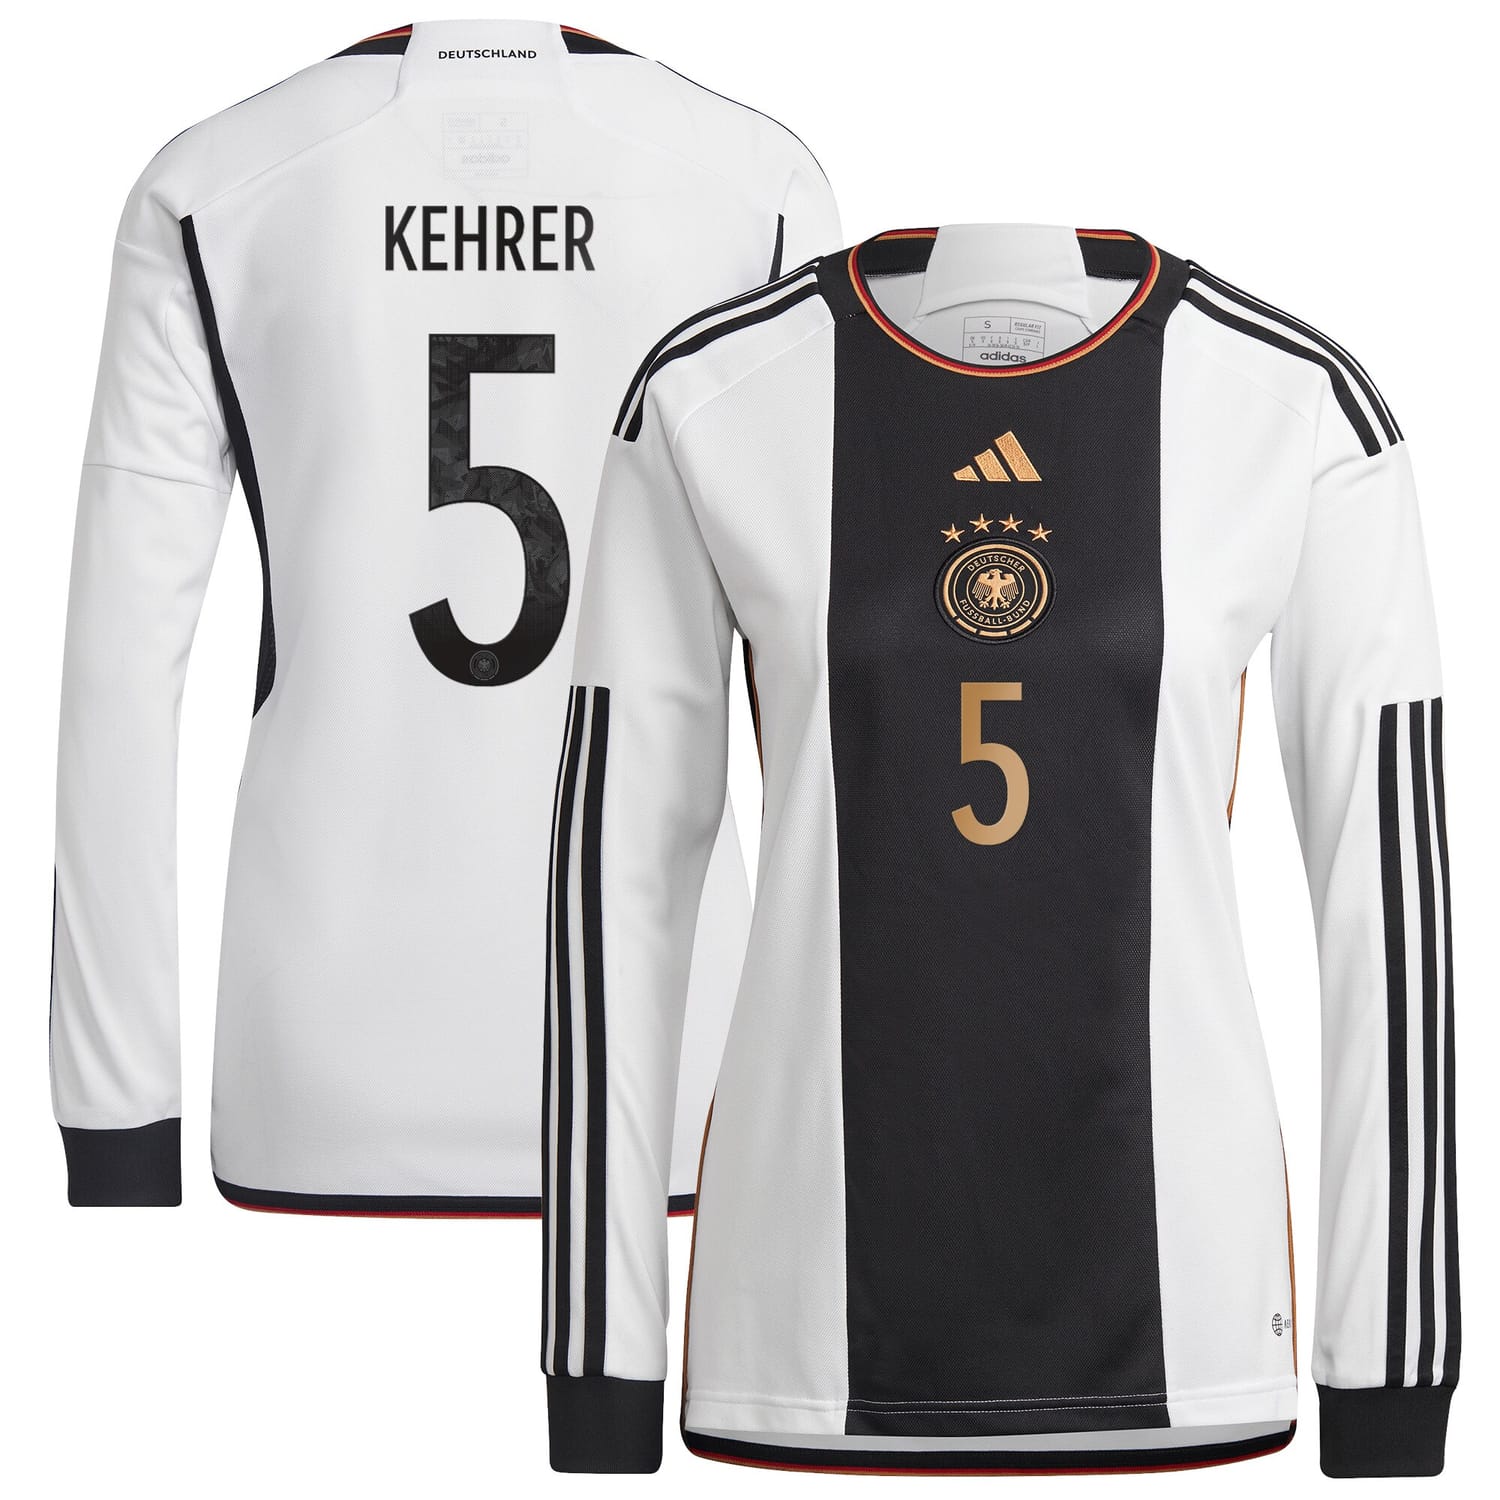 Germany National Team Home Jersey Shirt Long Sleeve player Kehrer 5 printing for Women